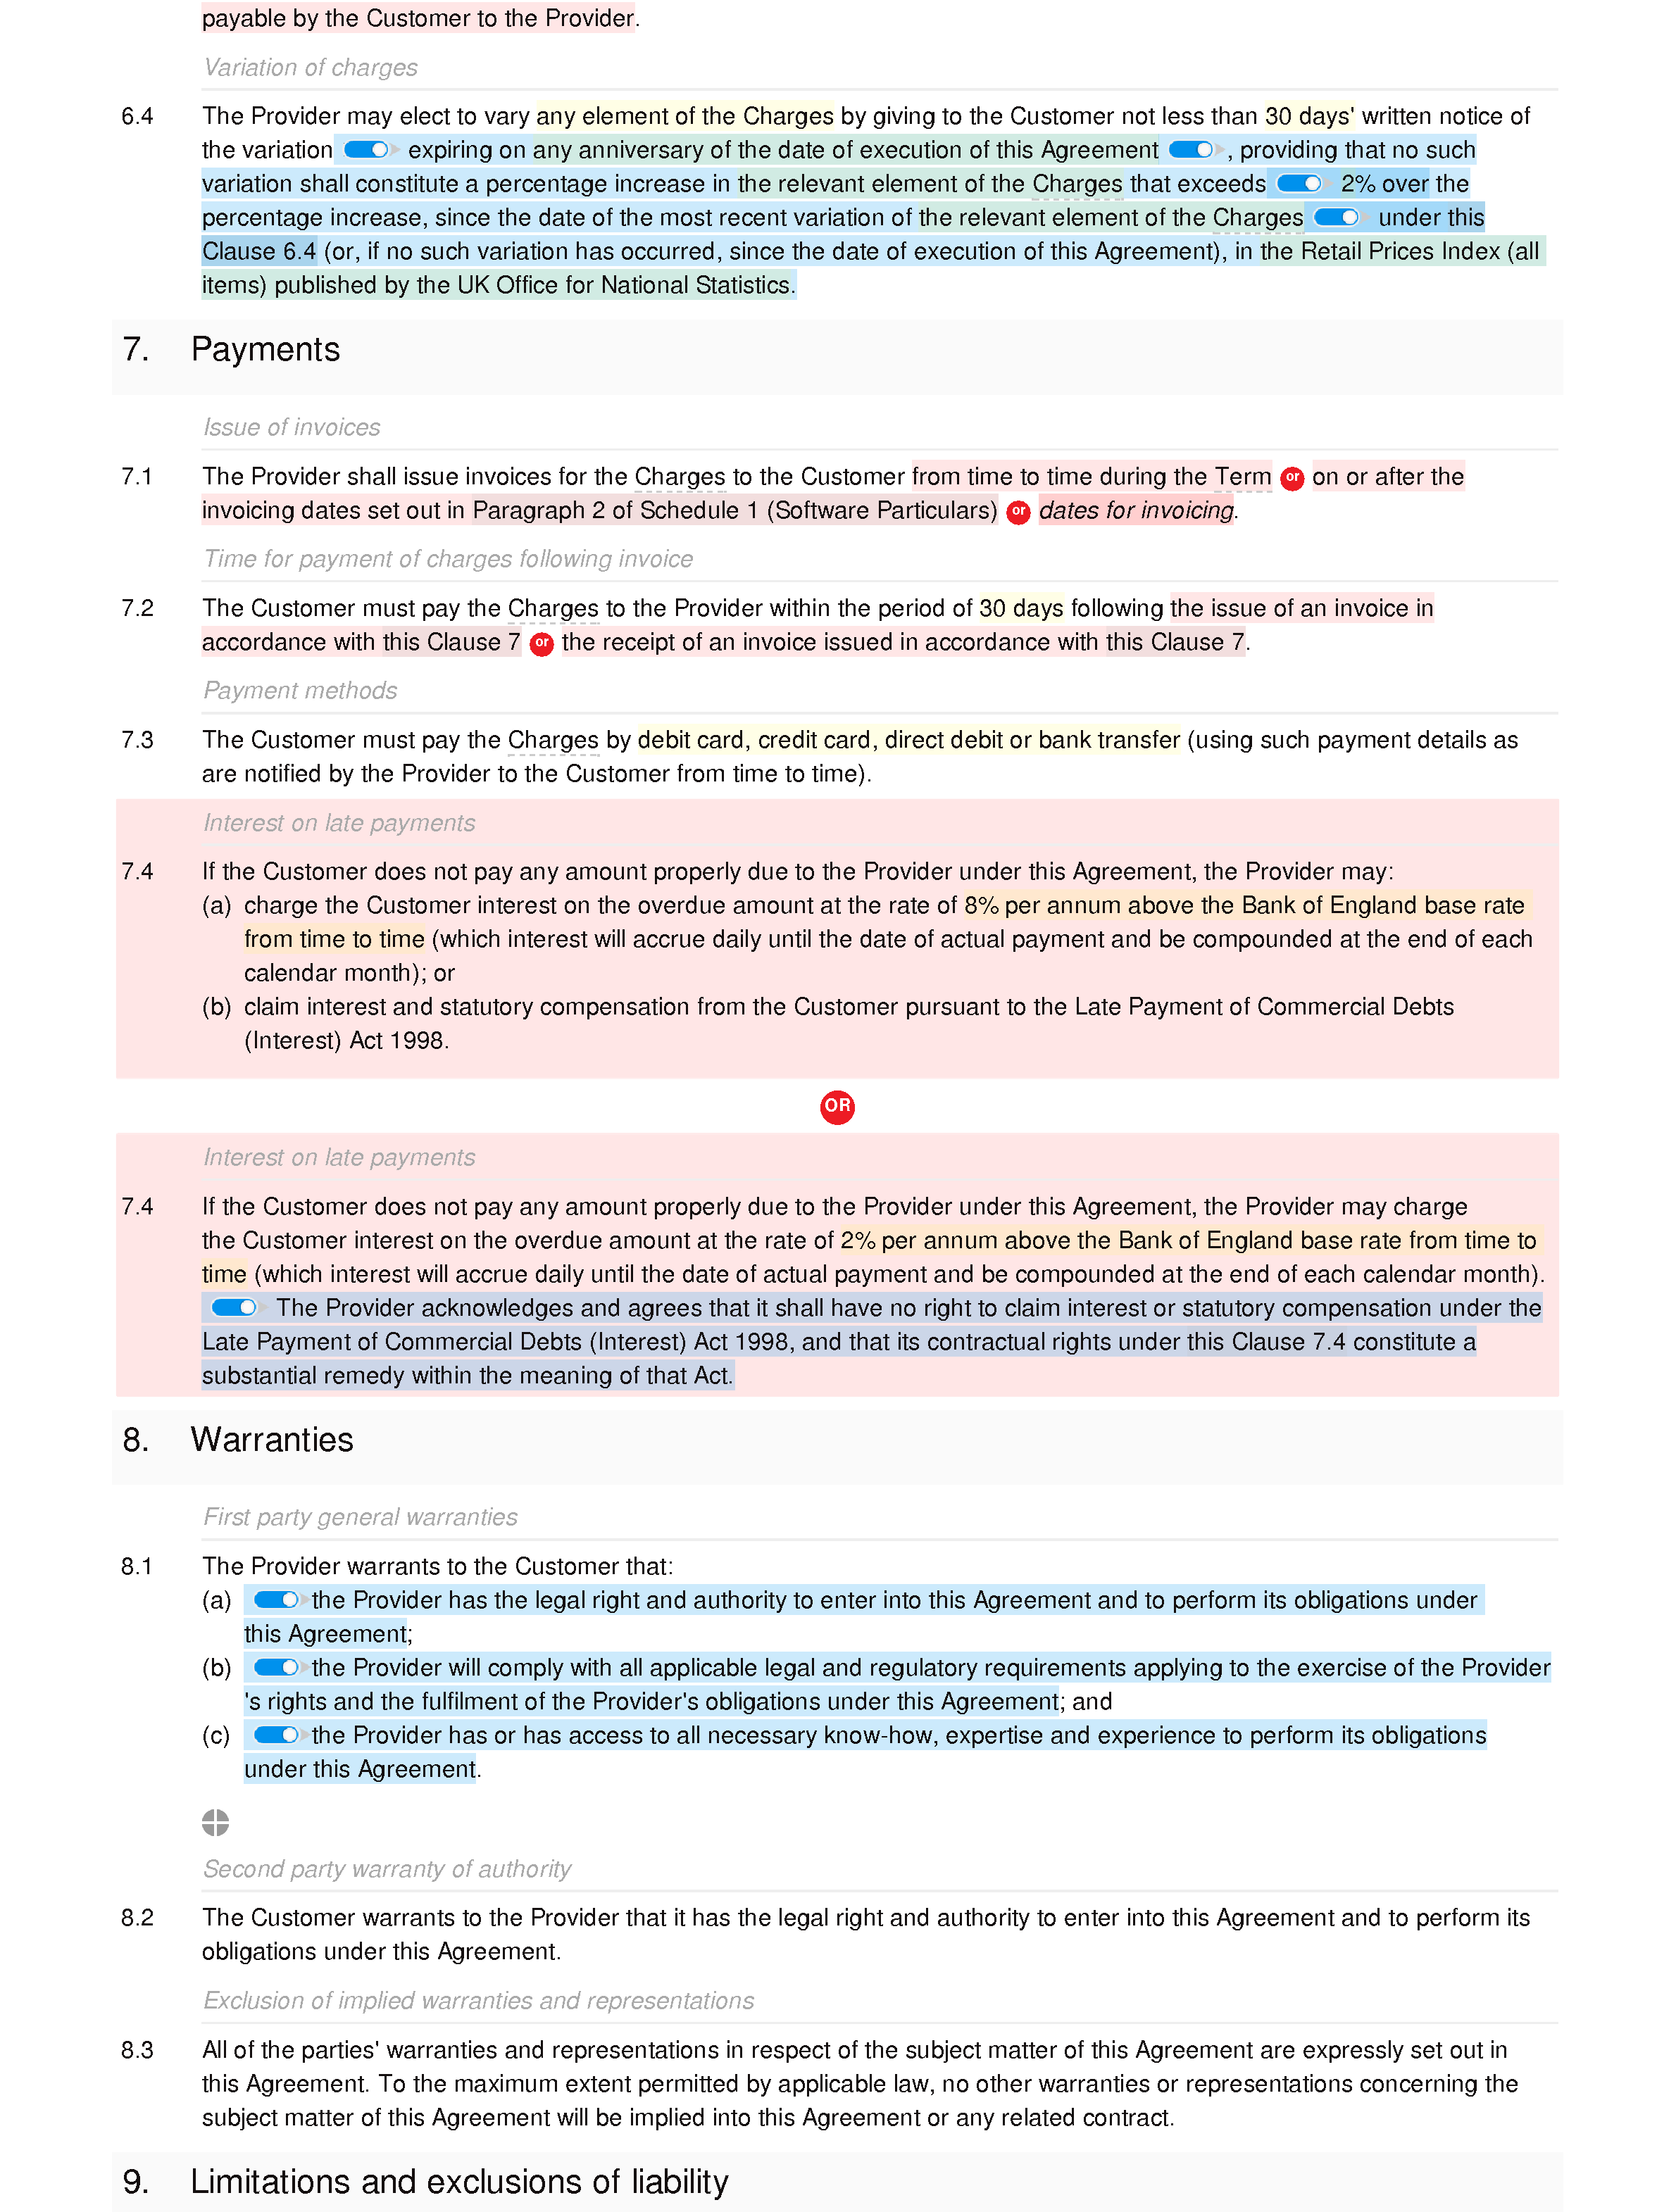 Free software support agreement document editor preview